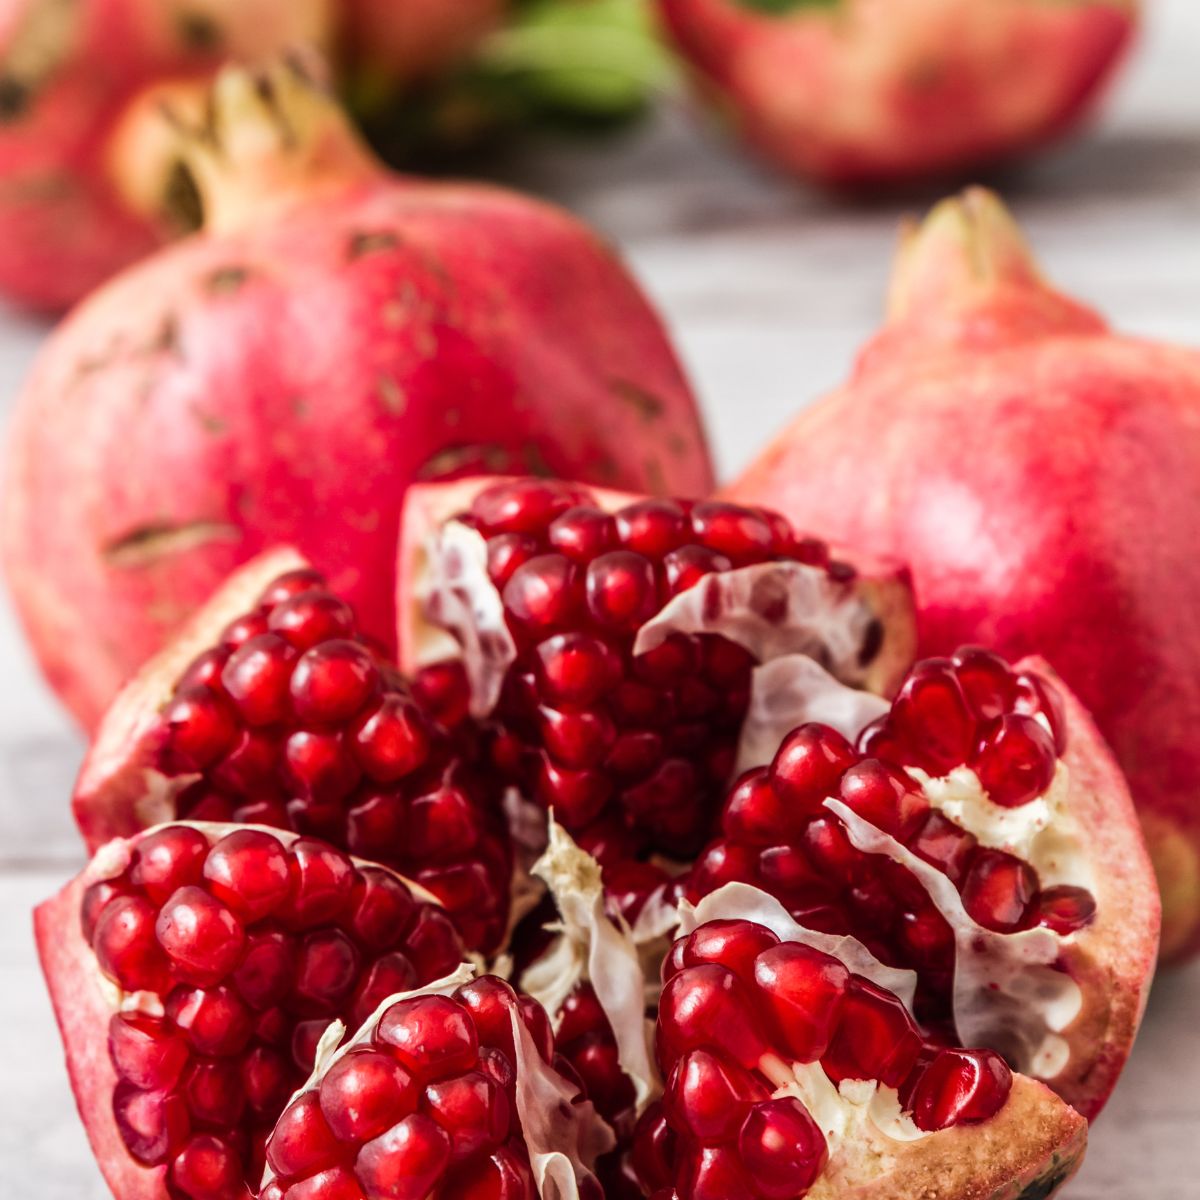 a pomegranate cut open showing seeds, with the chambers divided 